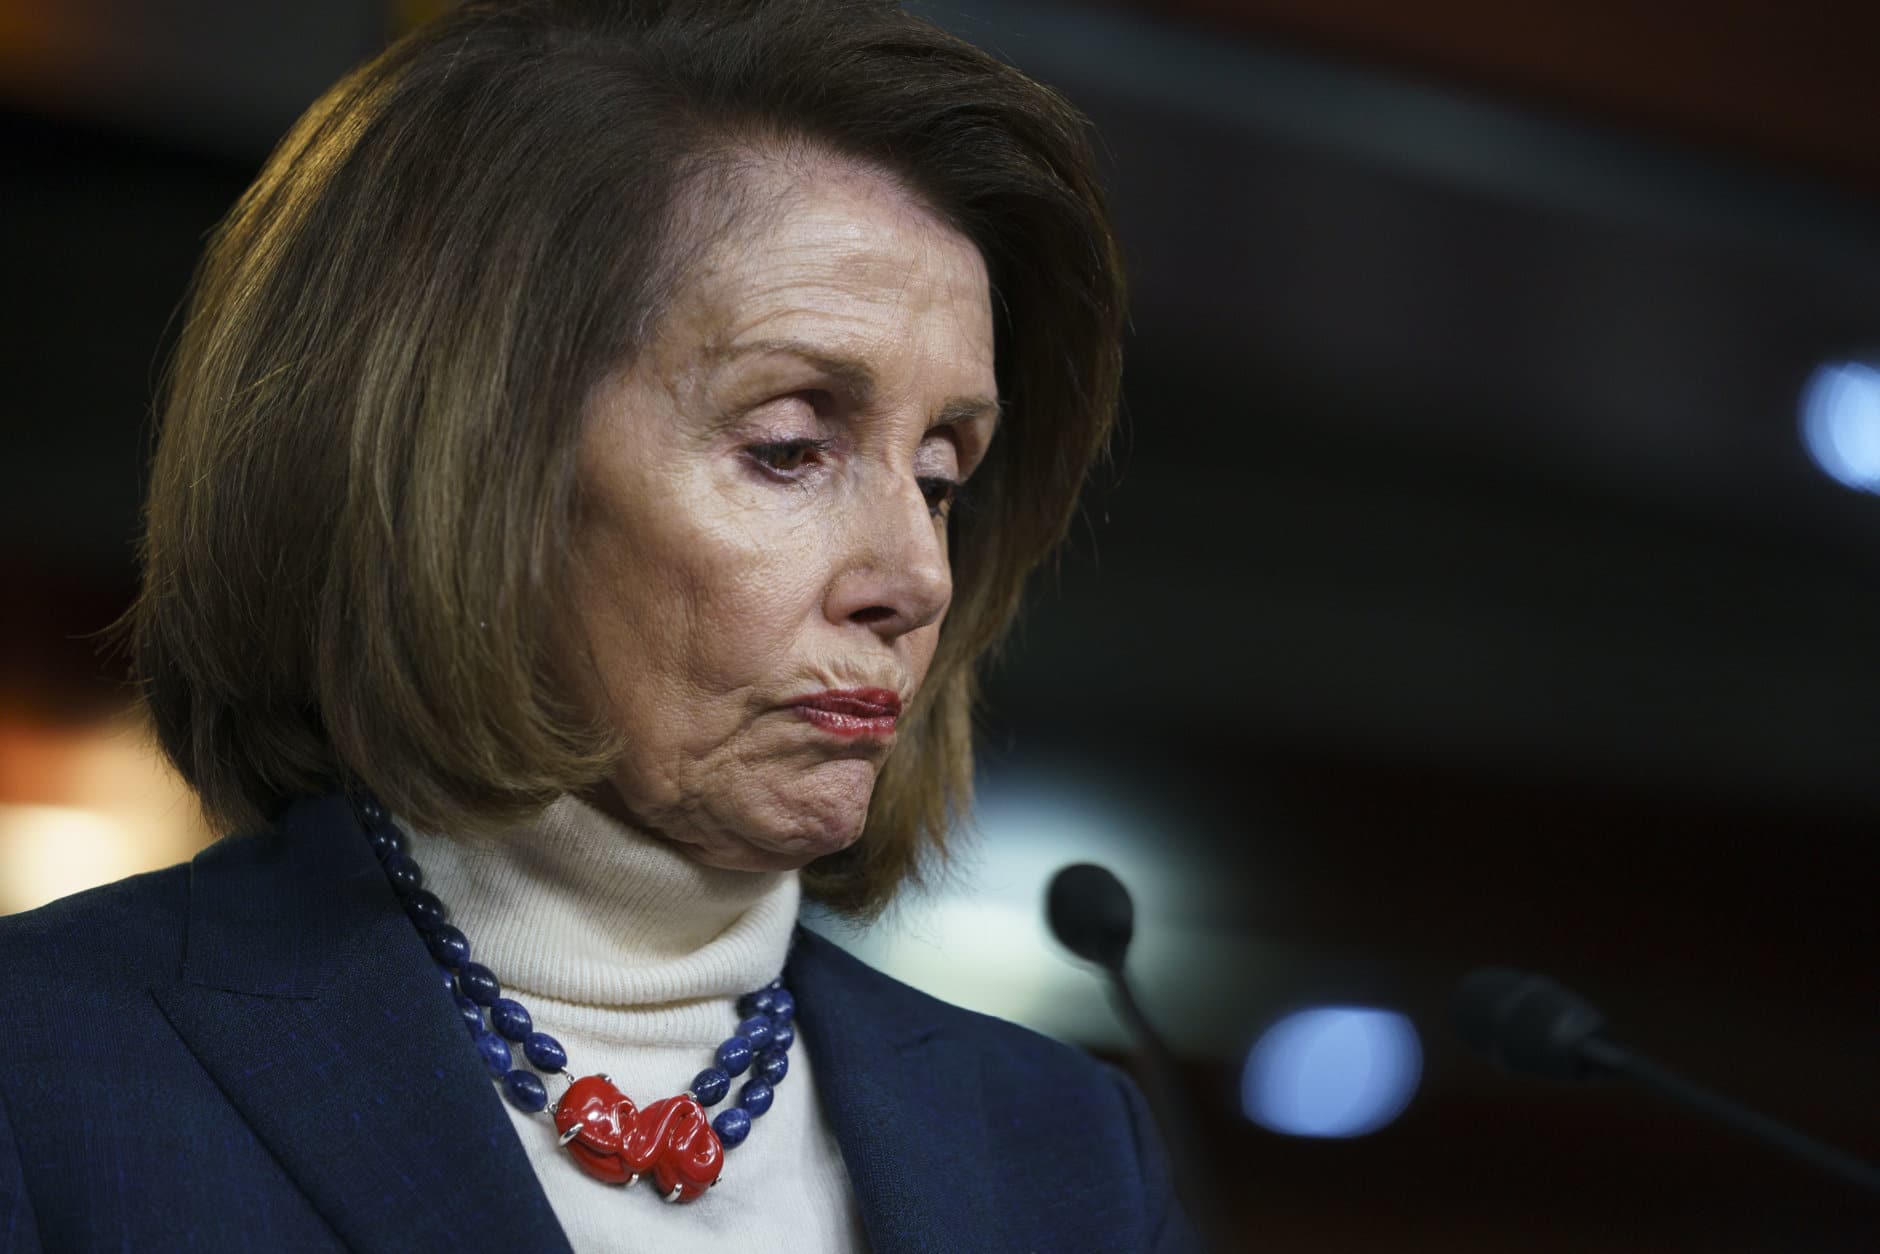 House Speaker Nancy Pelosi of Calif., pauses as she speaks during a news conference on Capitol Hill in Washington, Thursday, Jan. 17, 2019. (AP Photo/Carolyn Kaster)